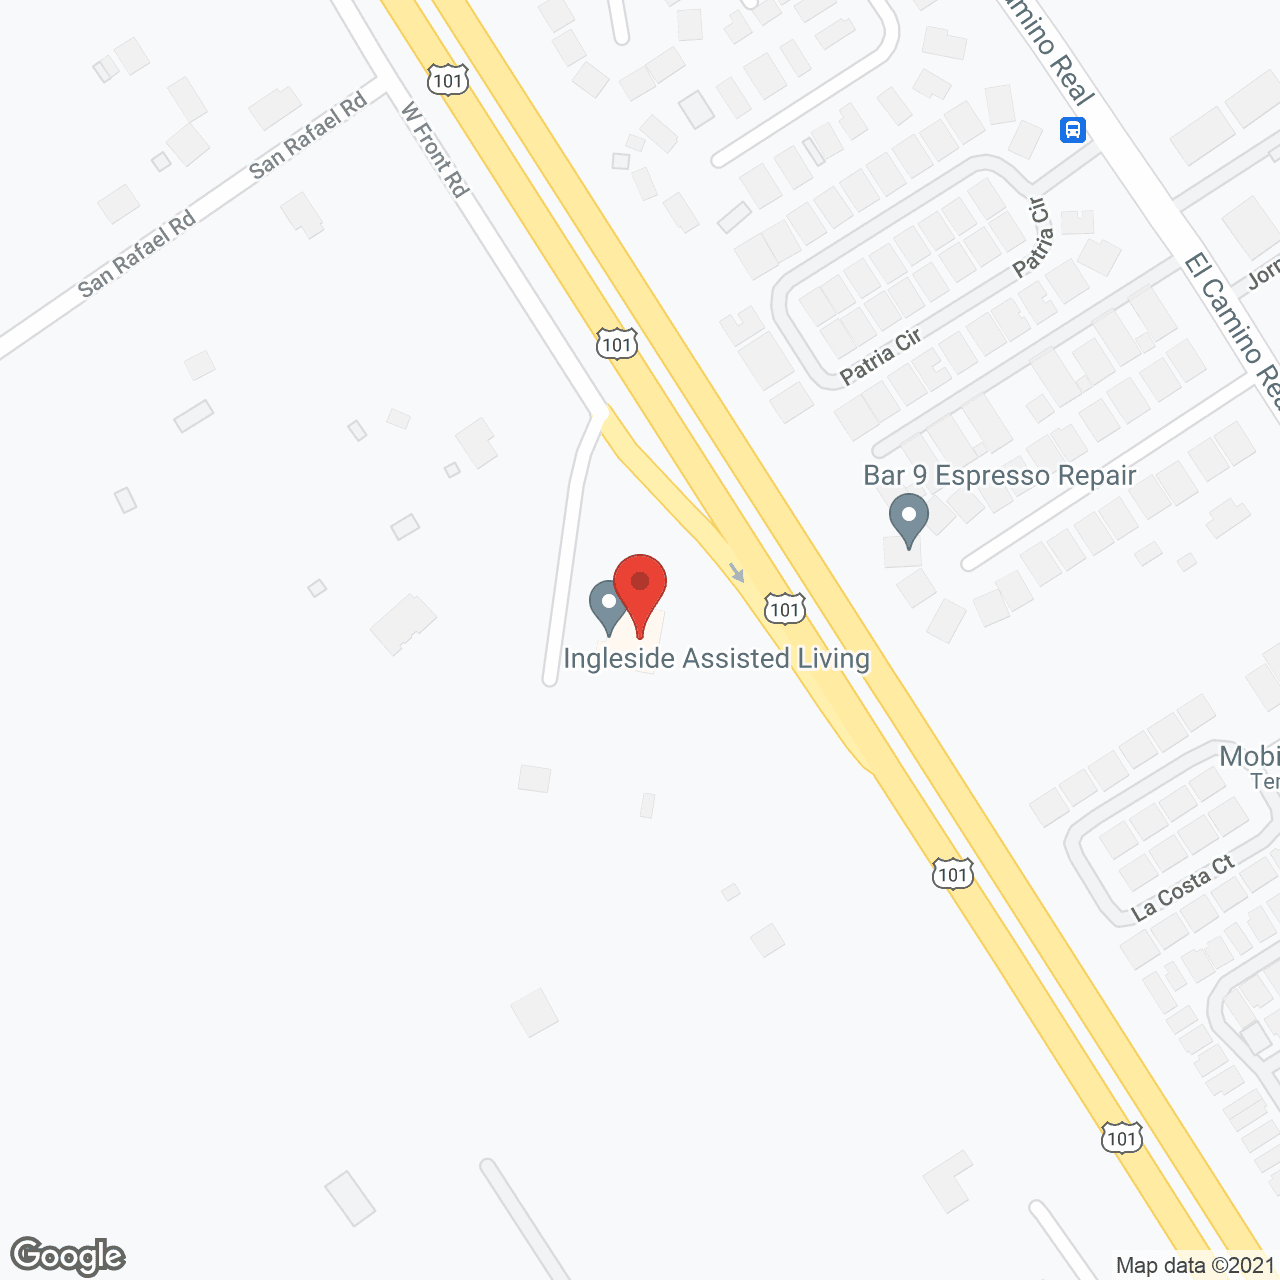 Ingleside Assisted Living in google map